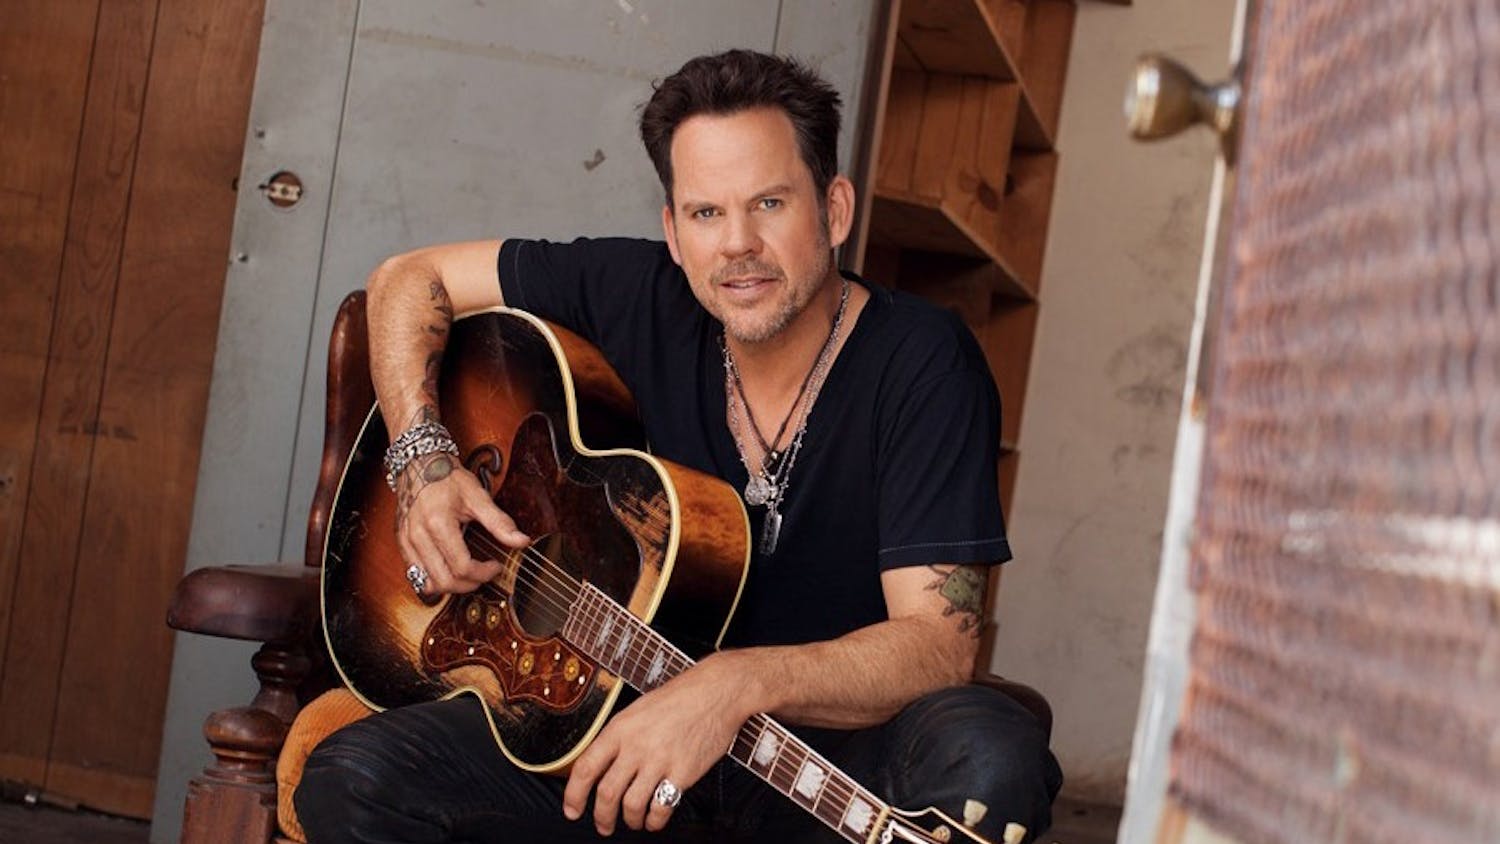 Country music artist Gary Allan will perform Nov. 3 at the IU Auditorium. Allan released his ninth album, "Set You Free," in 2013.&nbsp;